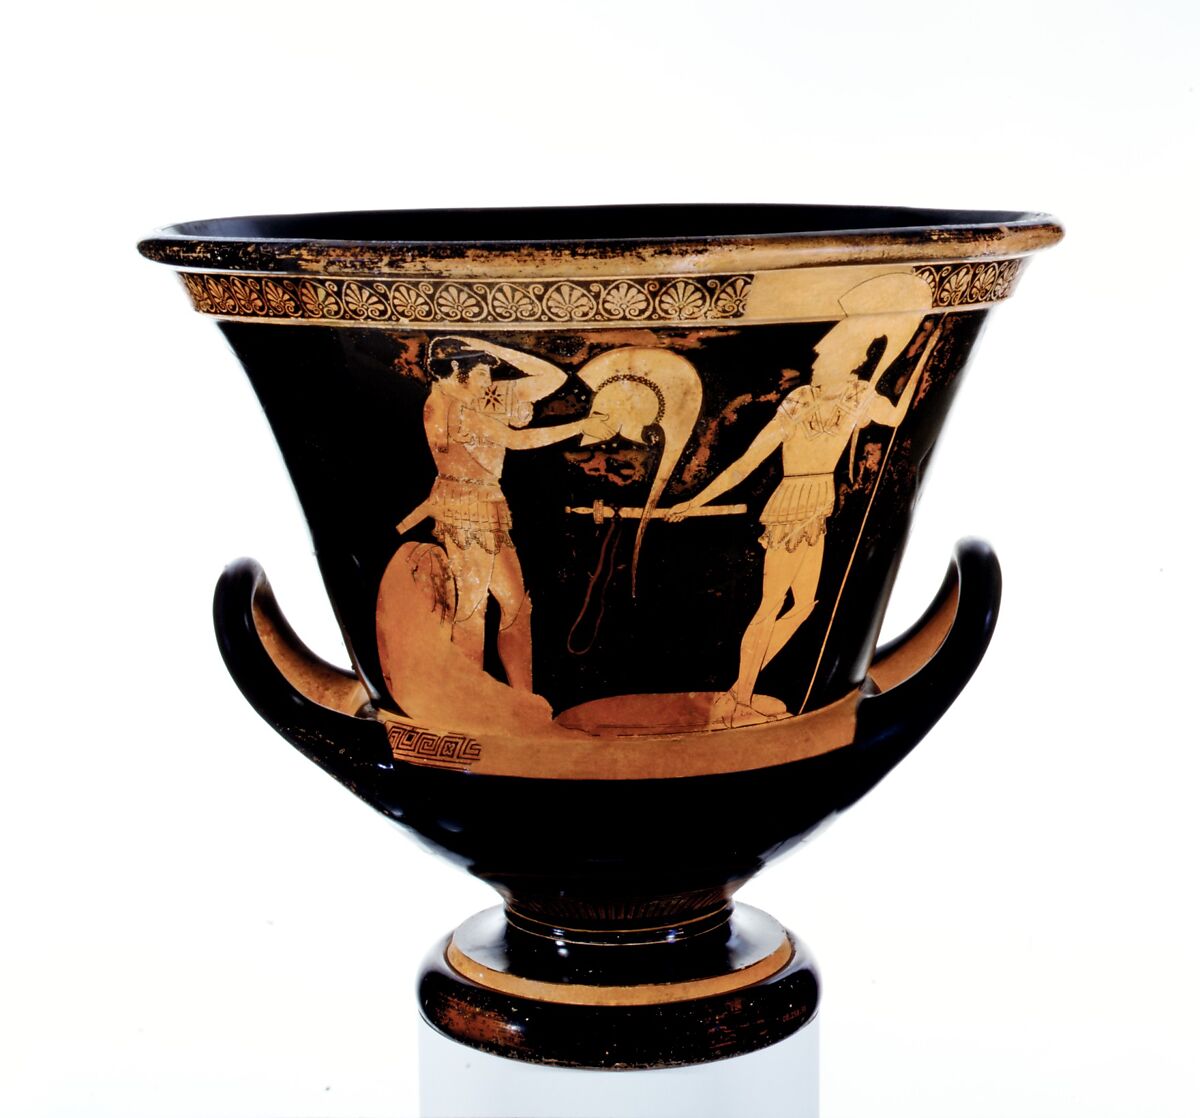 Terracotta calyx-krater (bowl for mixing wine and water), Attributed to the Kleophrades Painter, Terracotta, Greek, Attic 